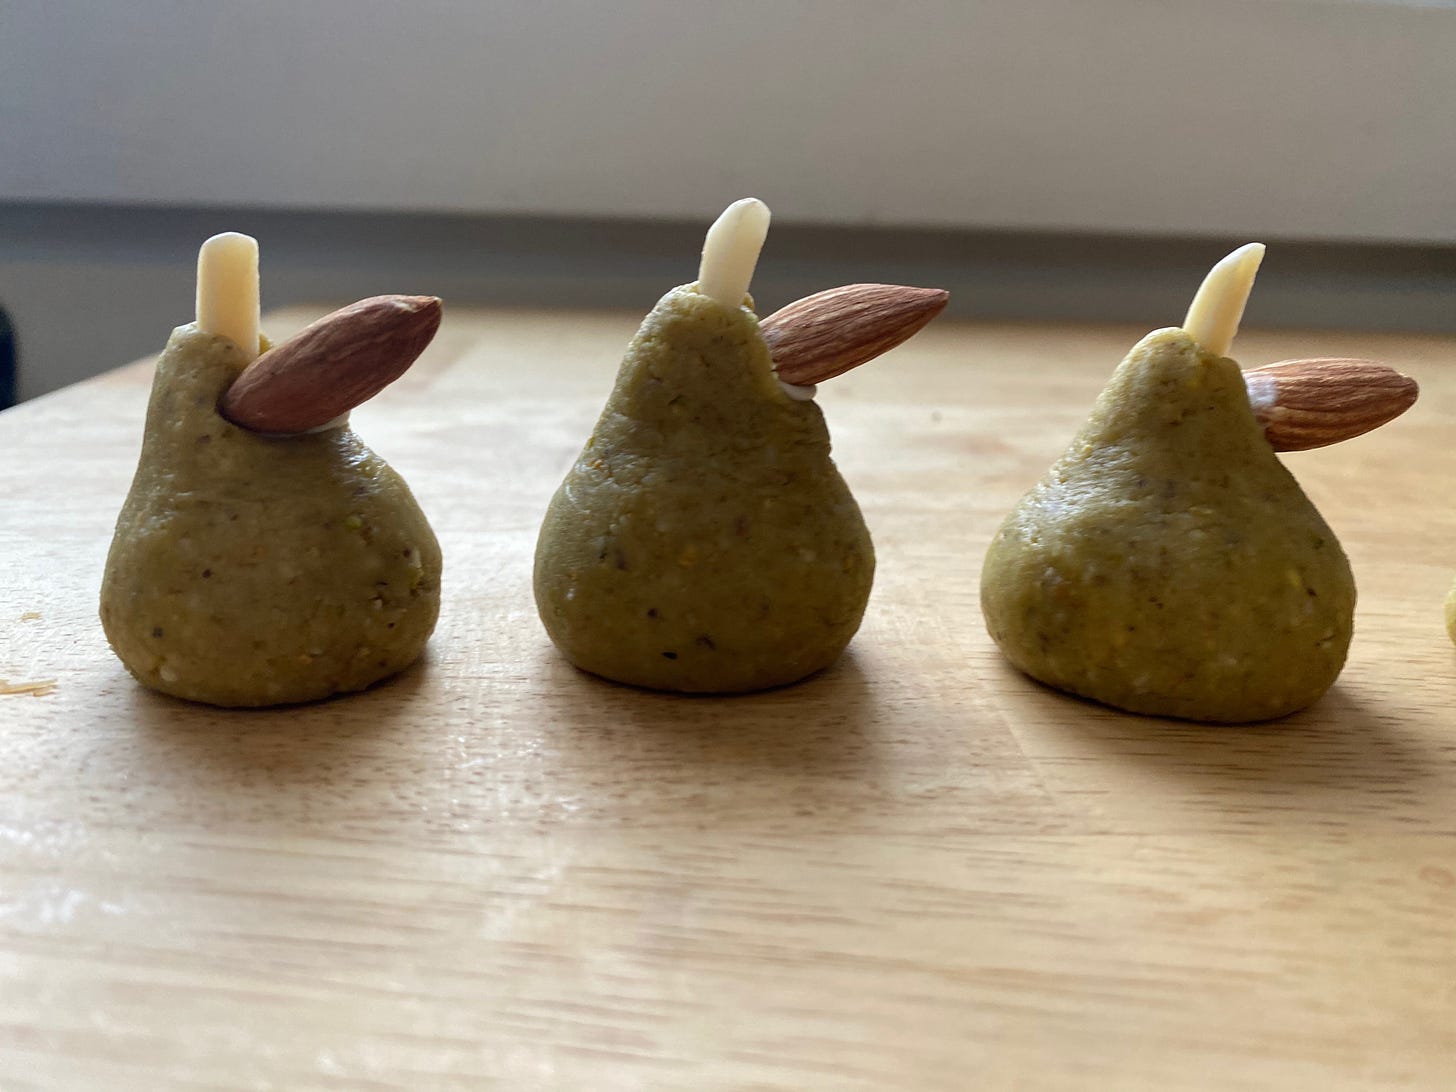 Three small pistachio marzipan pears sit on a wooden counter. They have slivered almonds sticking out of their tops to represent the pear’s stem, and a whole almond pointing out an an angle right below, to represent a leaf.